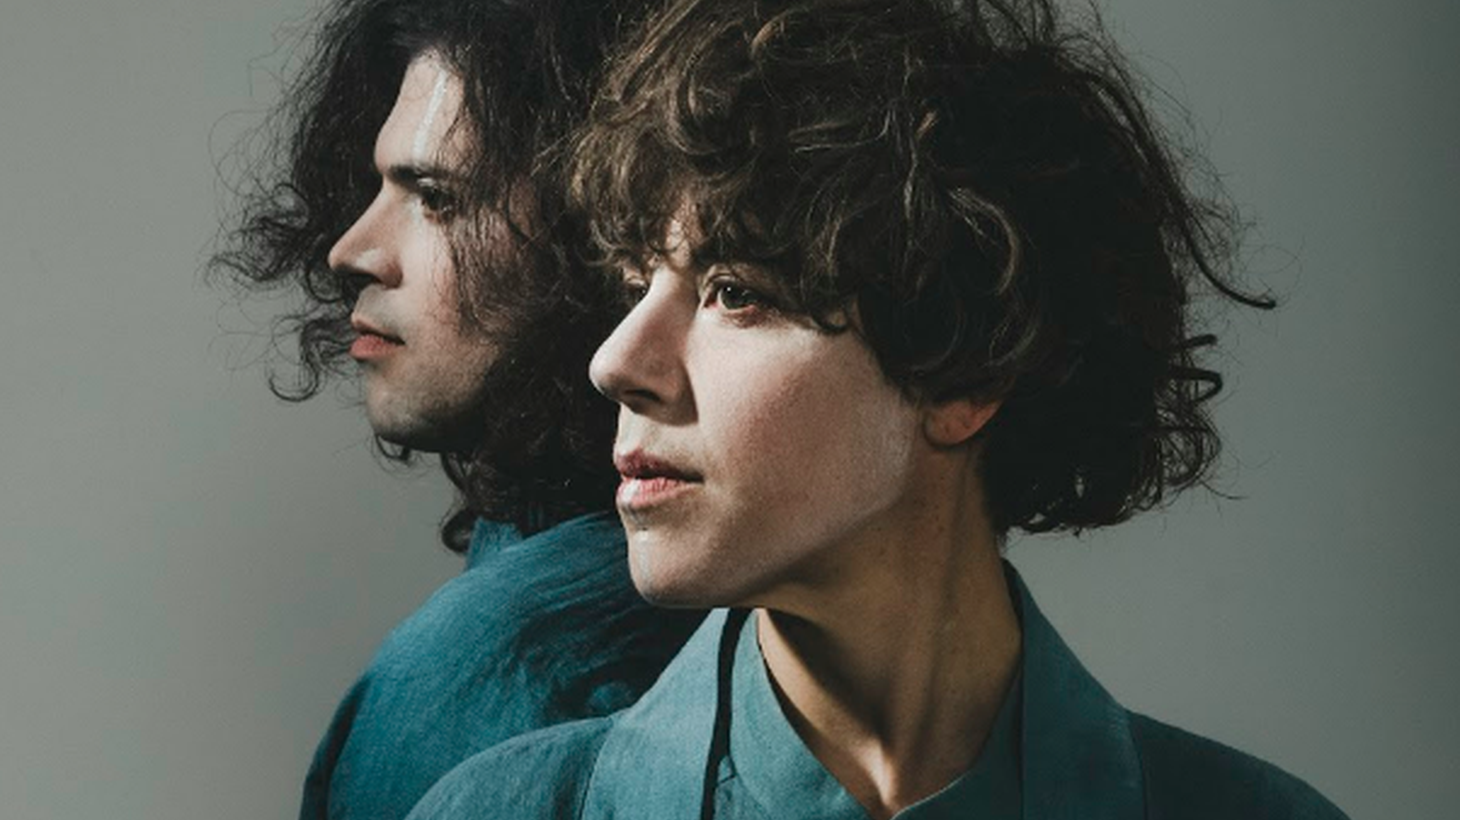 For the 4th Tune-Yards full length album I can feel you creep into my private life, bandleader Merrill Garbus turned to her longtime bass player Nate Brenner as her producing partner.